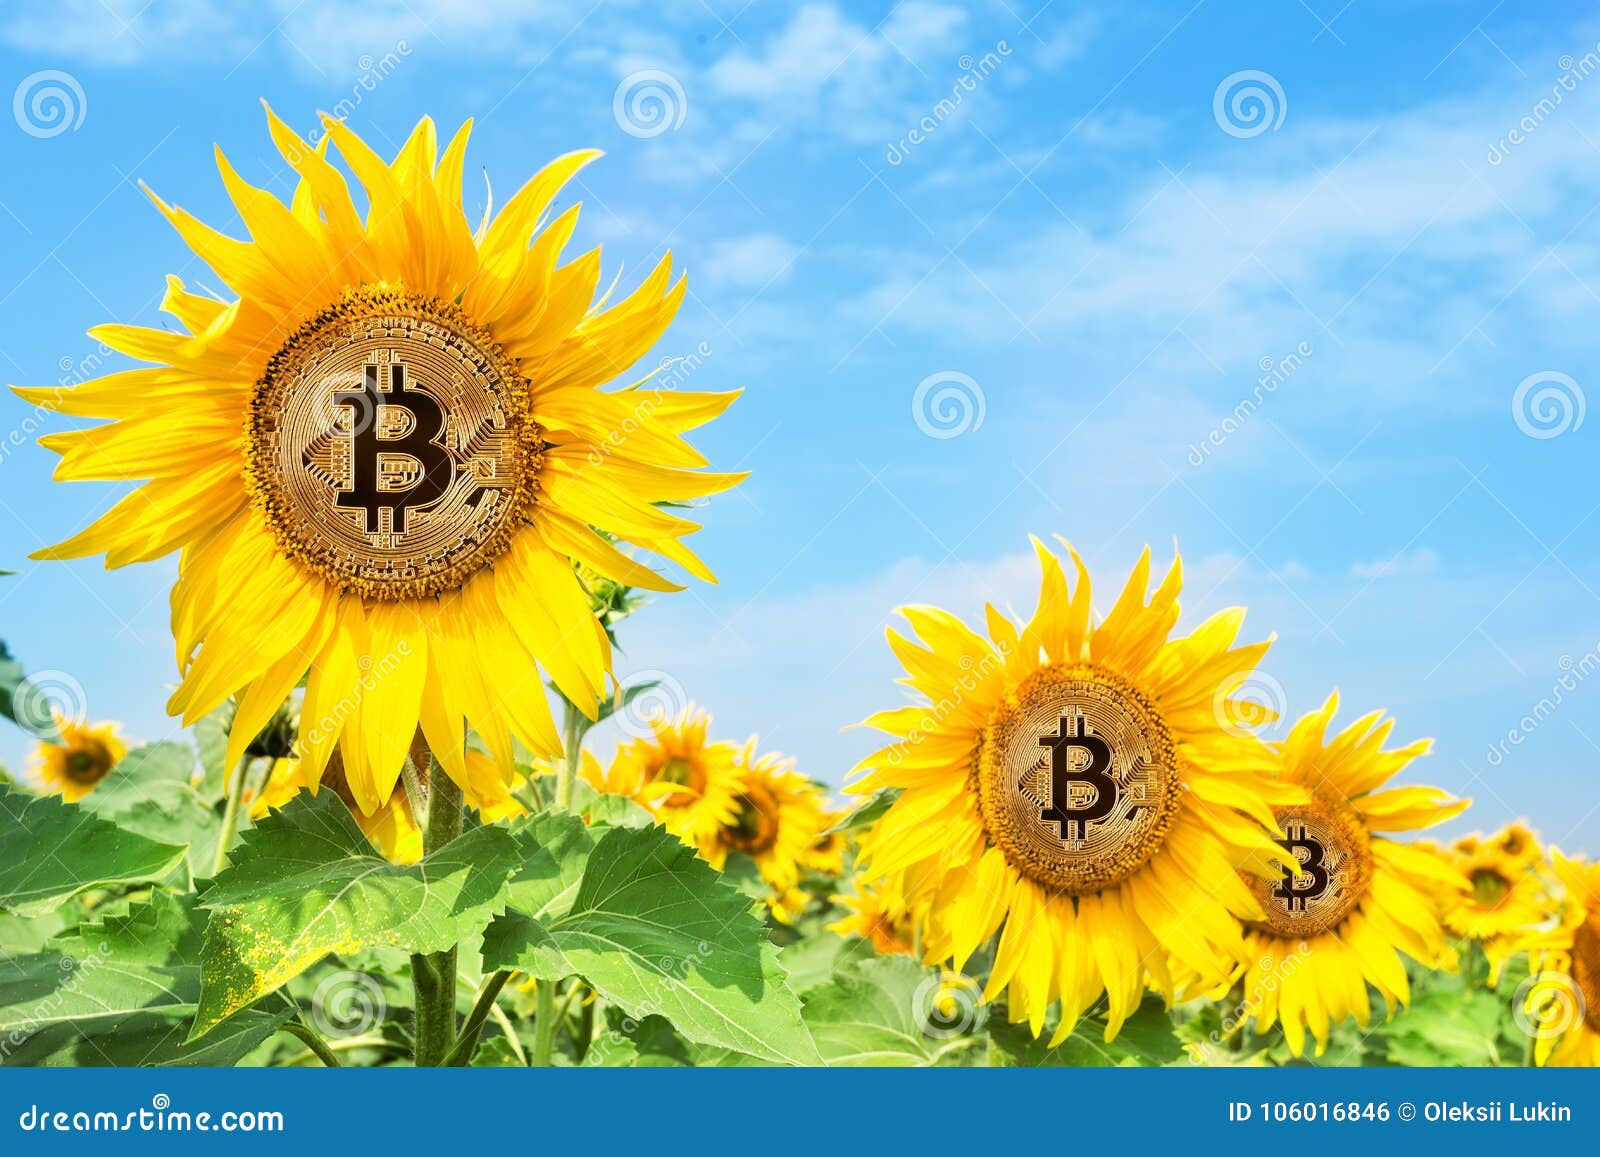 cryptocurrency pictures of flowers